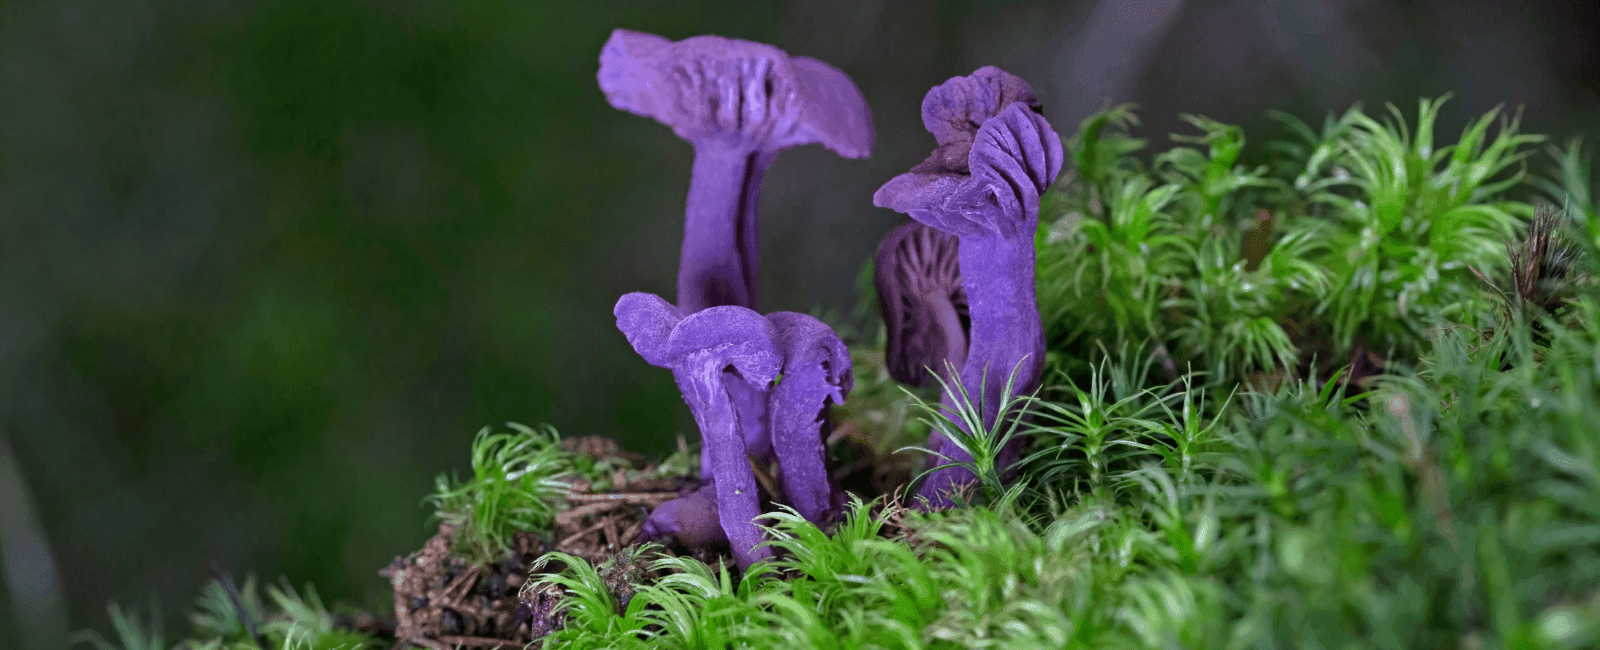 ROY G. BIV: The World's 16 Most Colorful Fungi